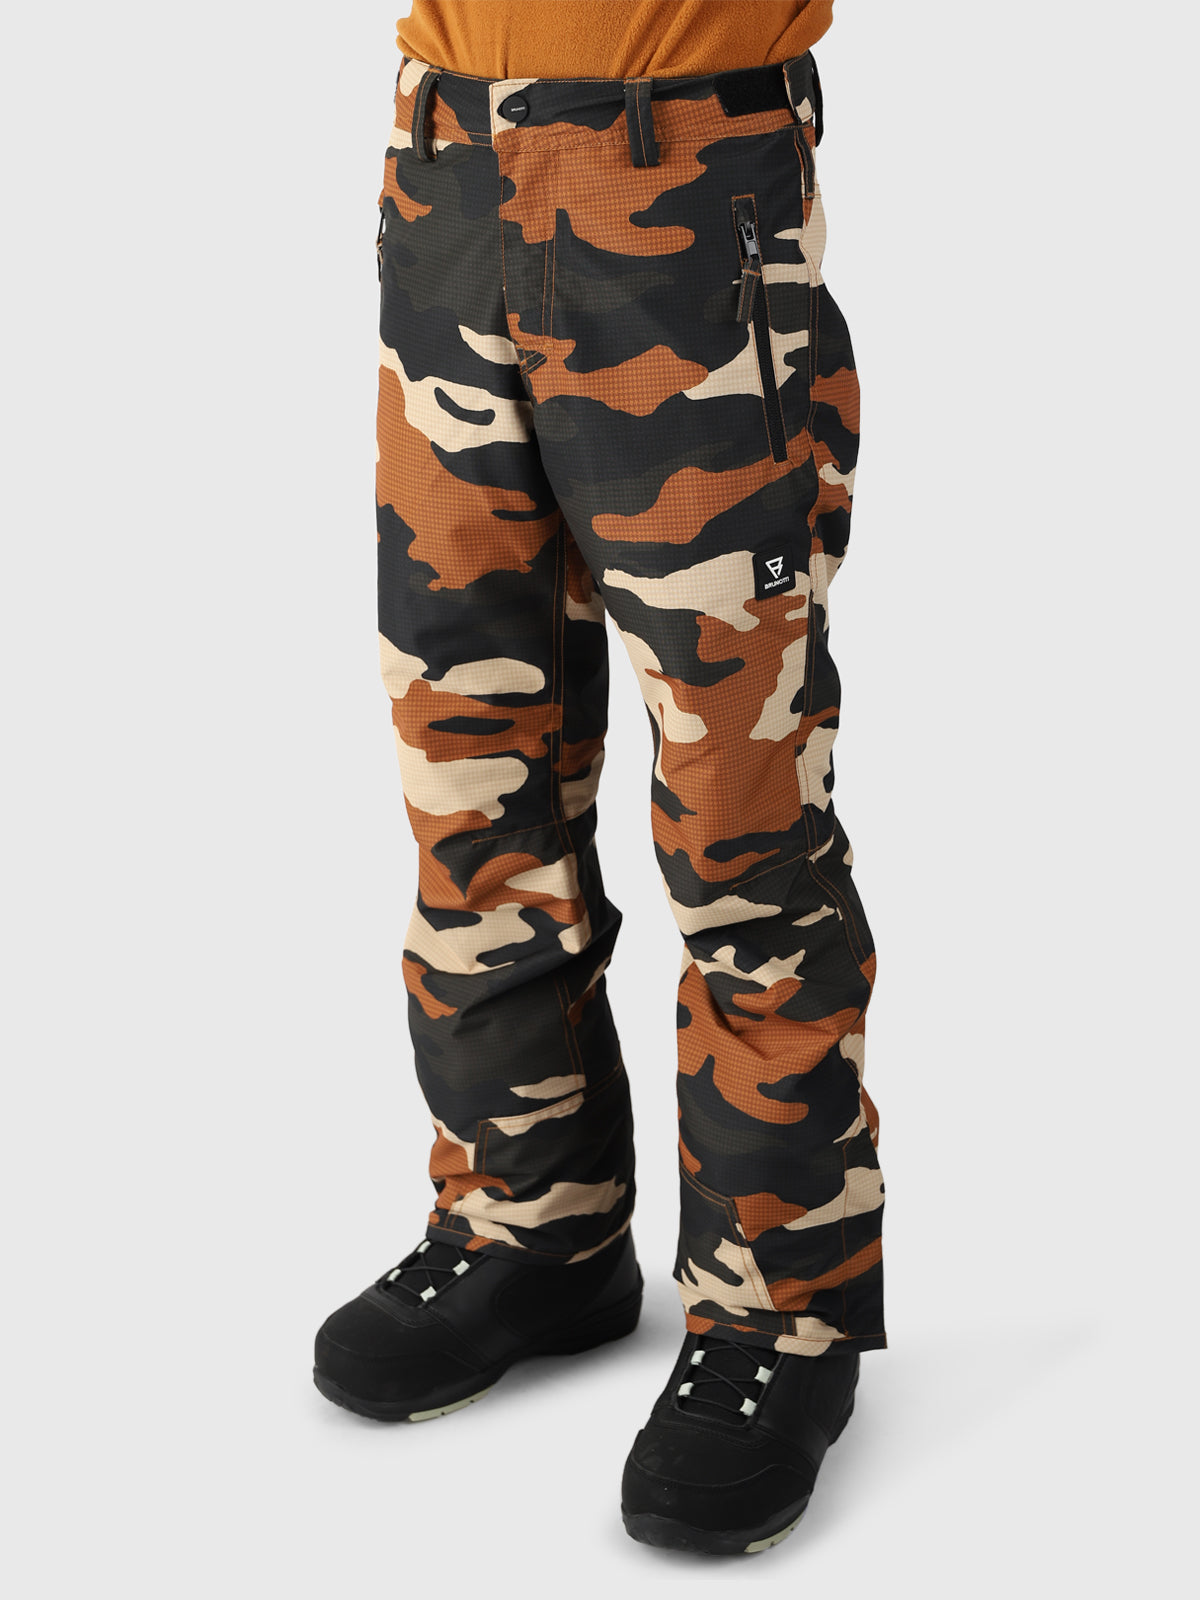 Footraily-AO Boys Snow Pants | Camouflage Brown